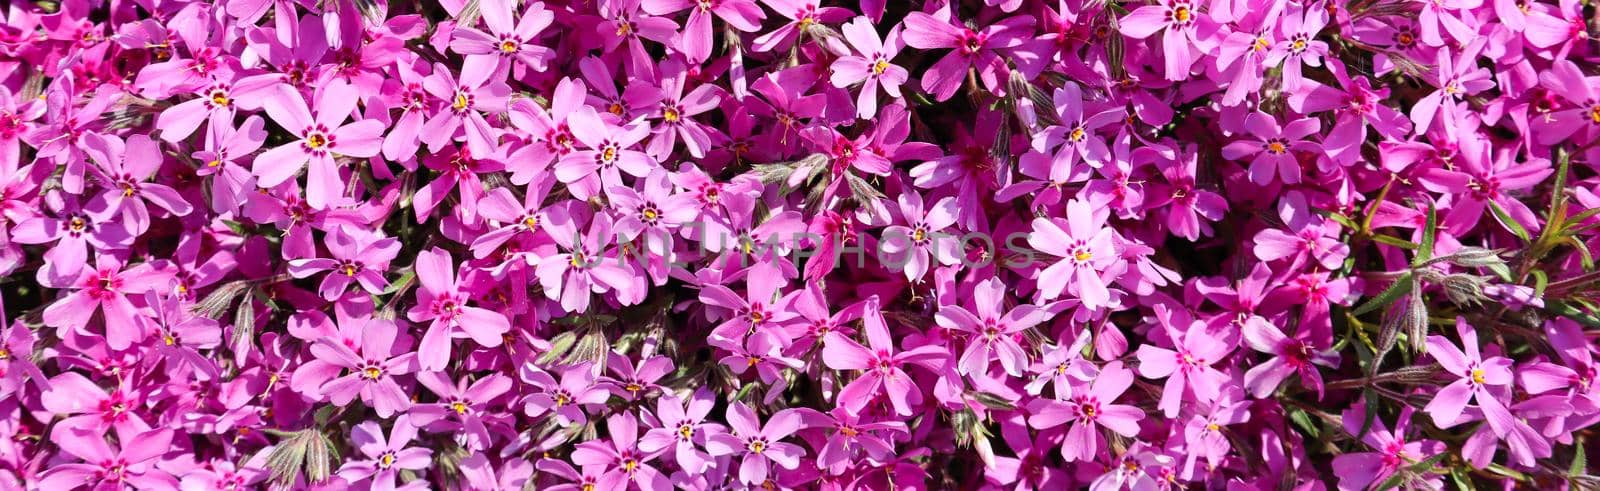 Background of pink flowers (Phlox) in spring by Olayola